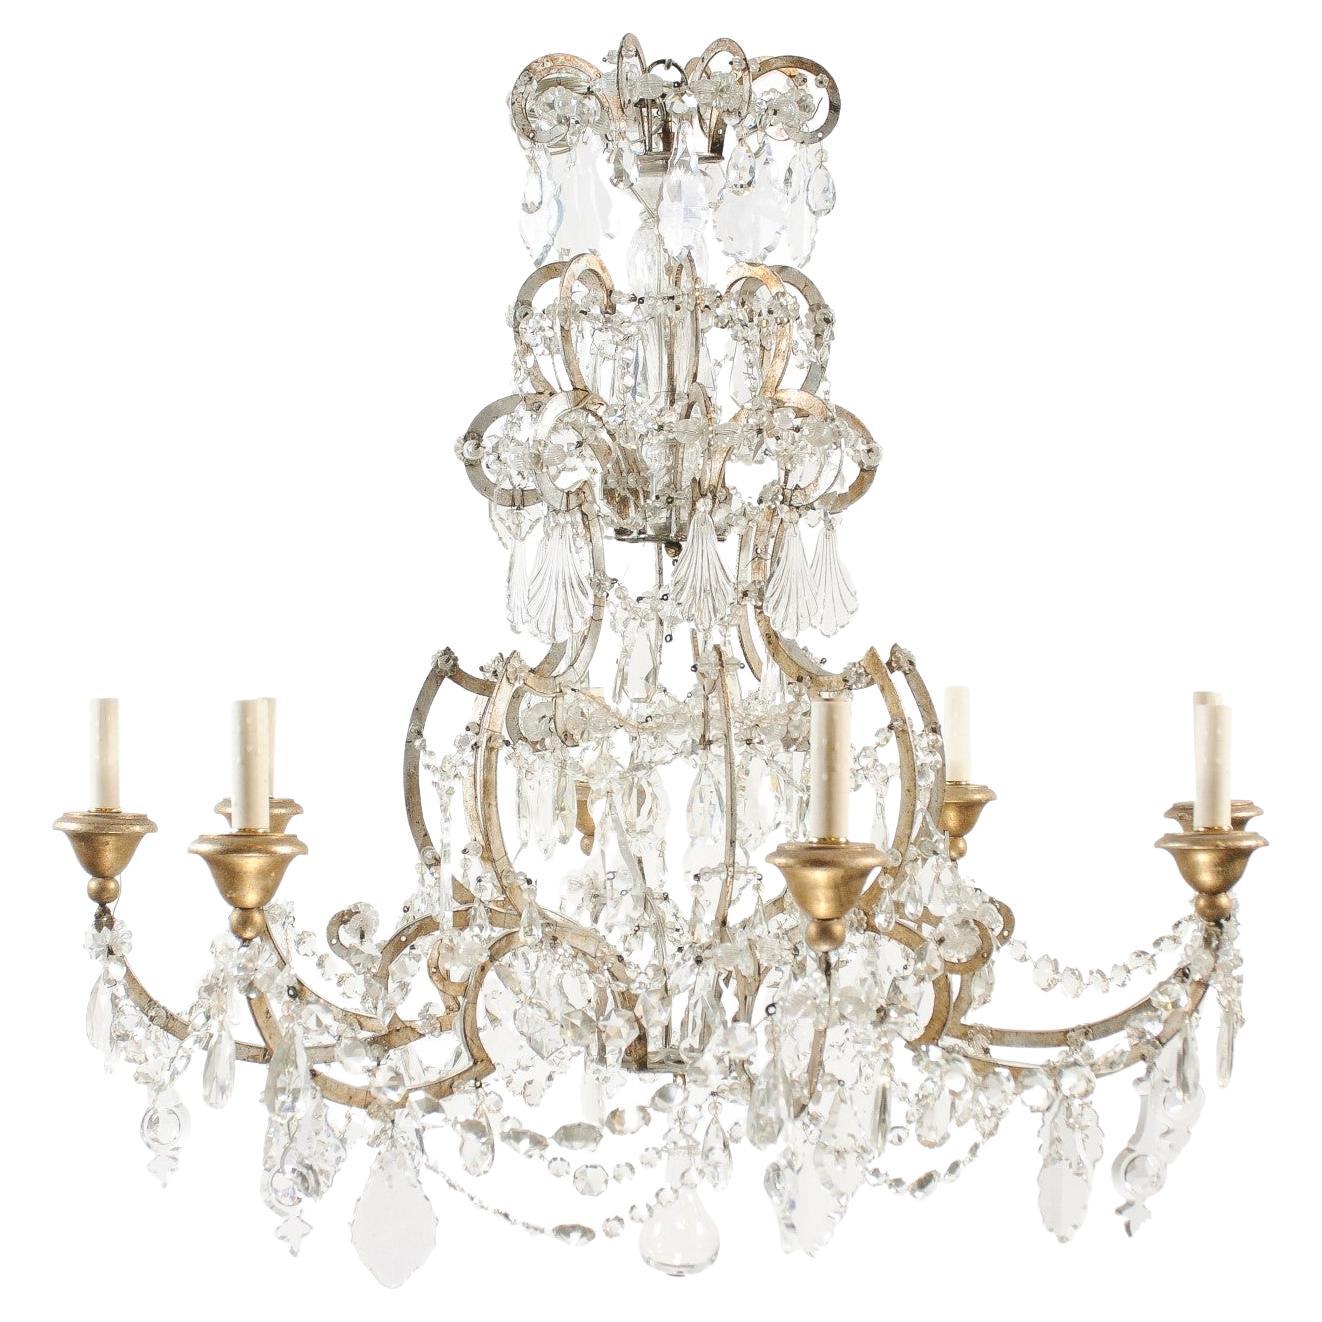 Italian Crystal & Silvered Wood Chandelier with 8 Lights, 19th Century